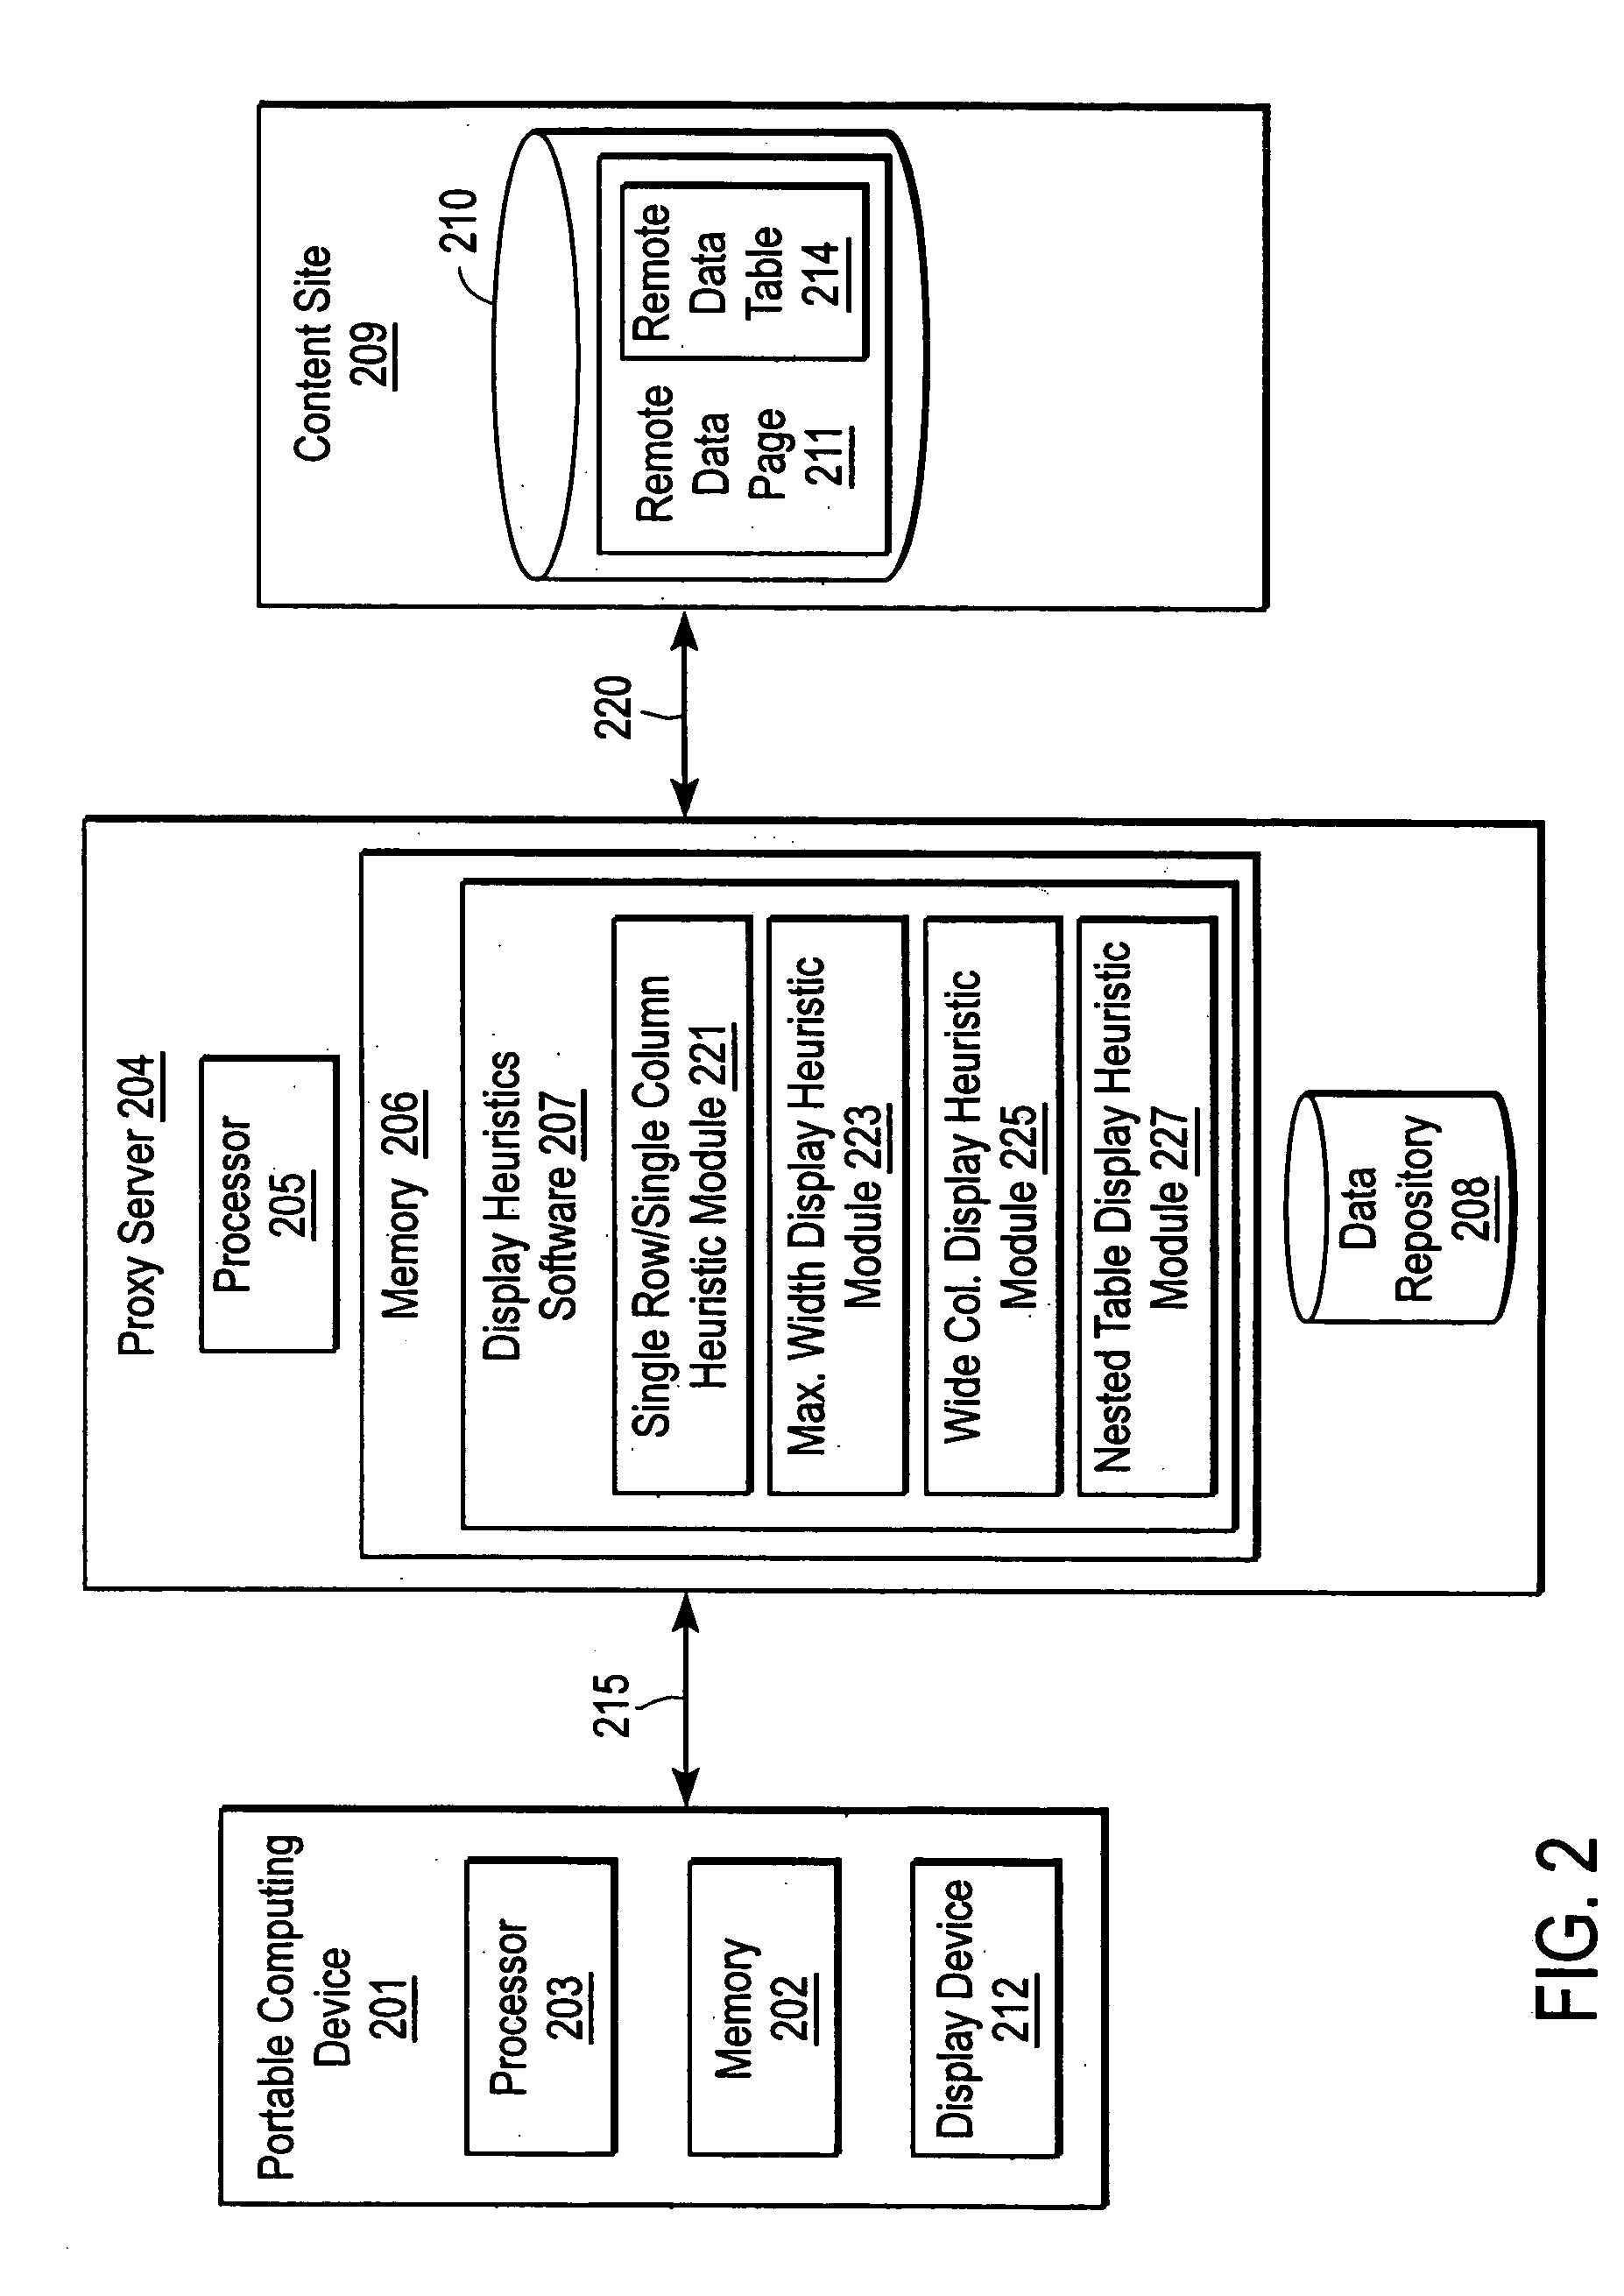 Translating tabular data formatted for one display device to a format for display on other display devices